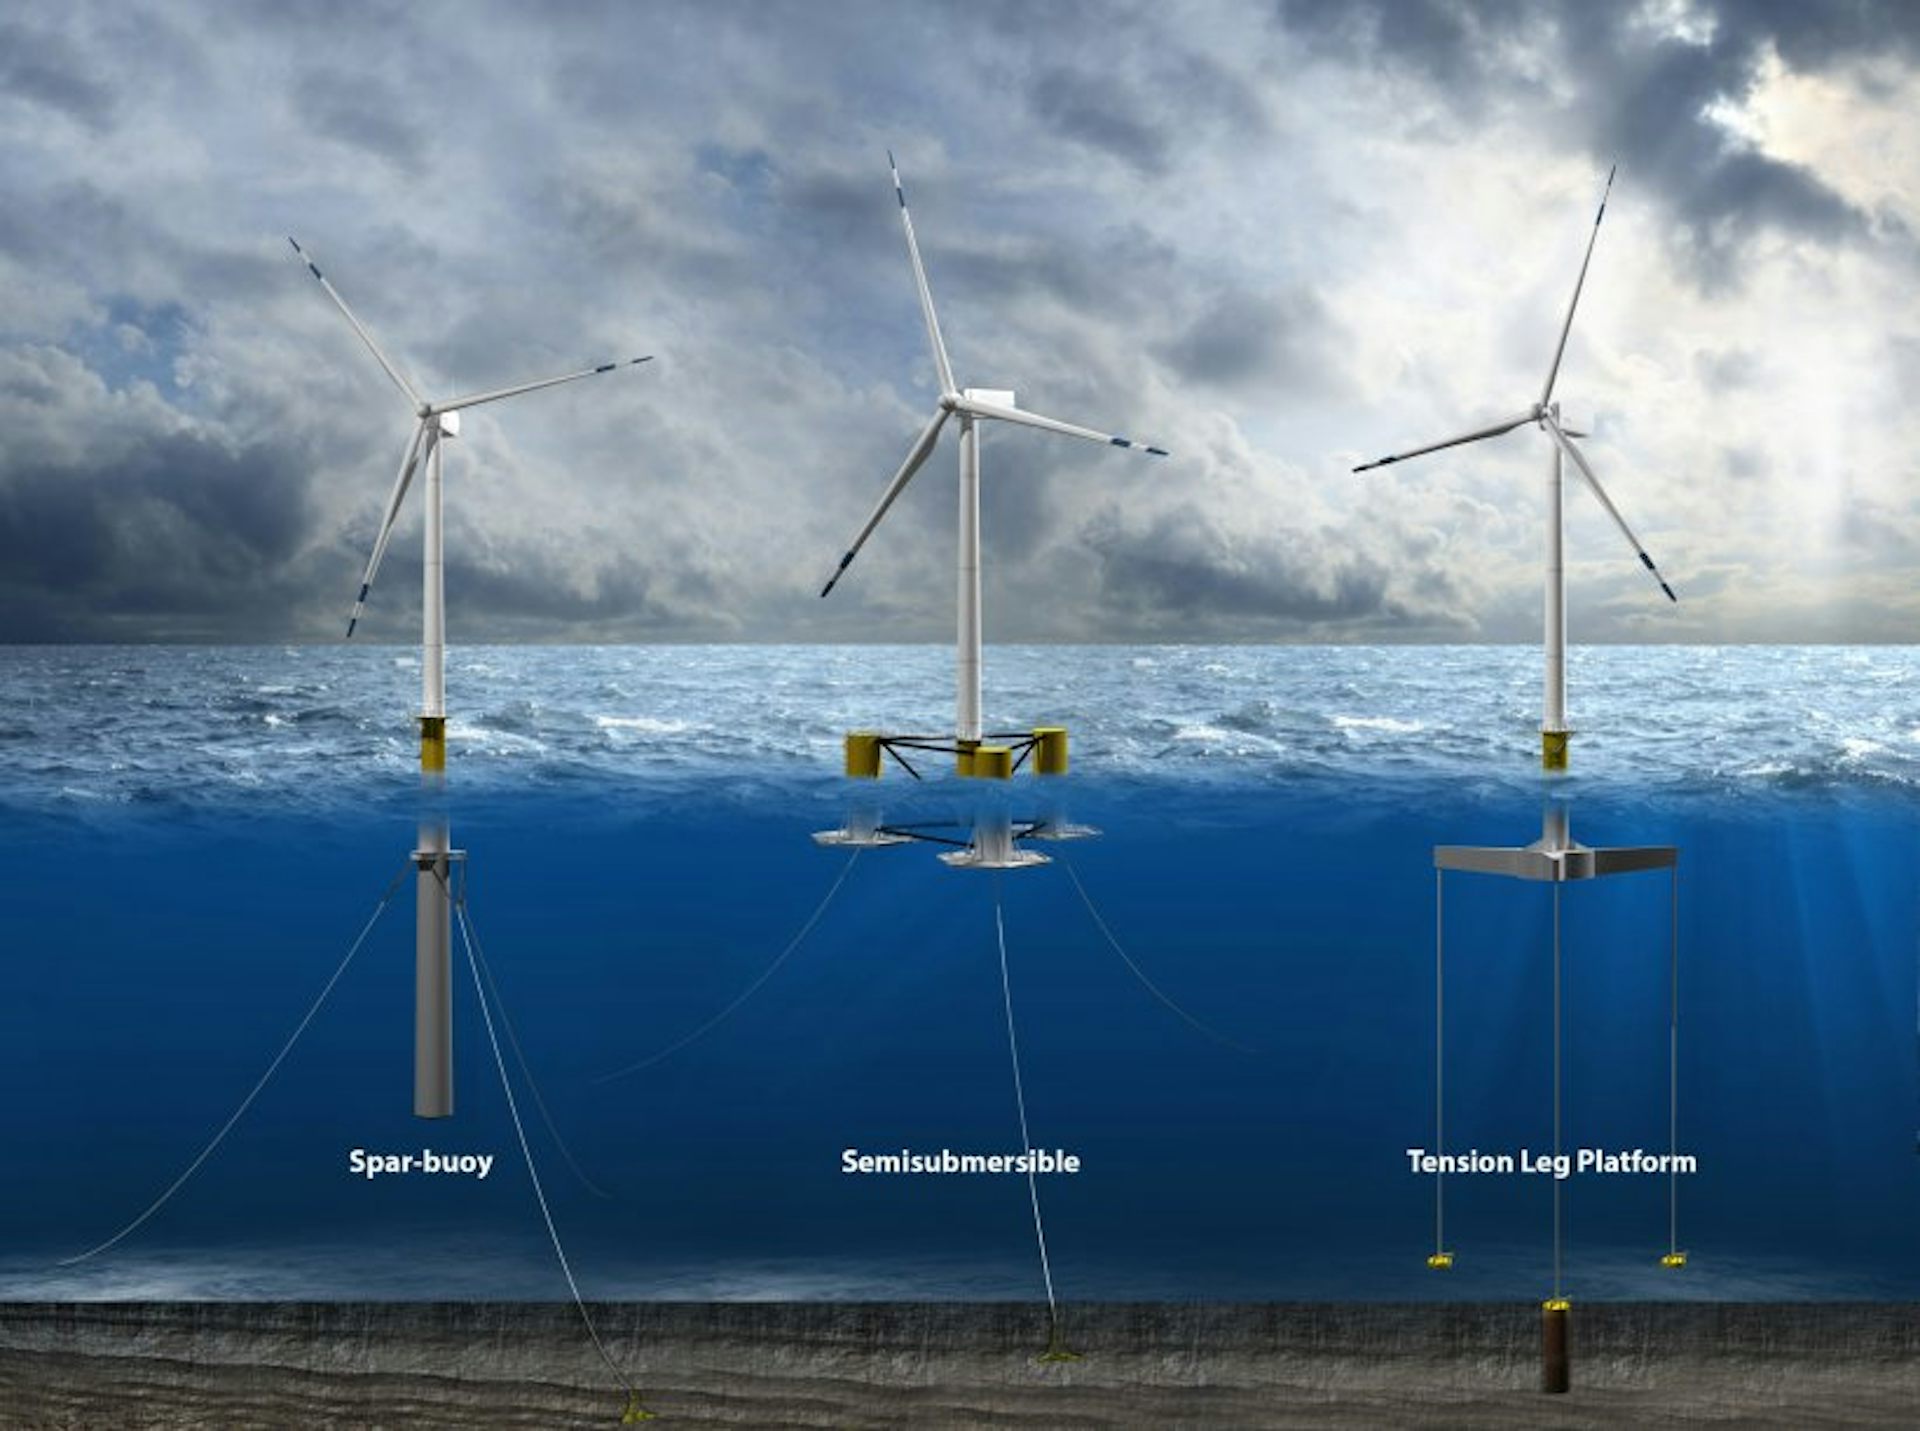 California is planning floating wind farms offshore to boost its 